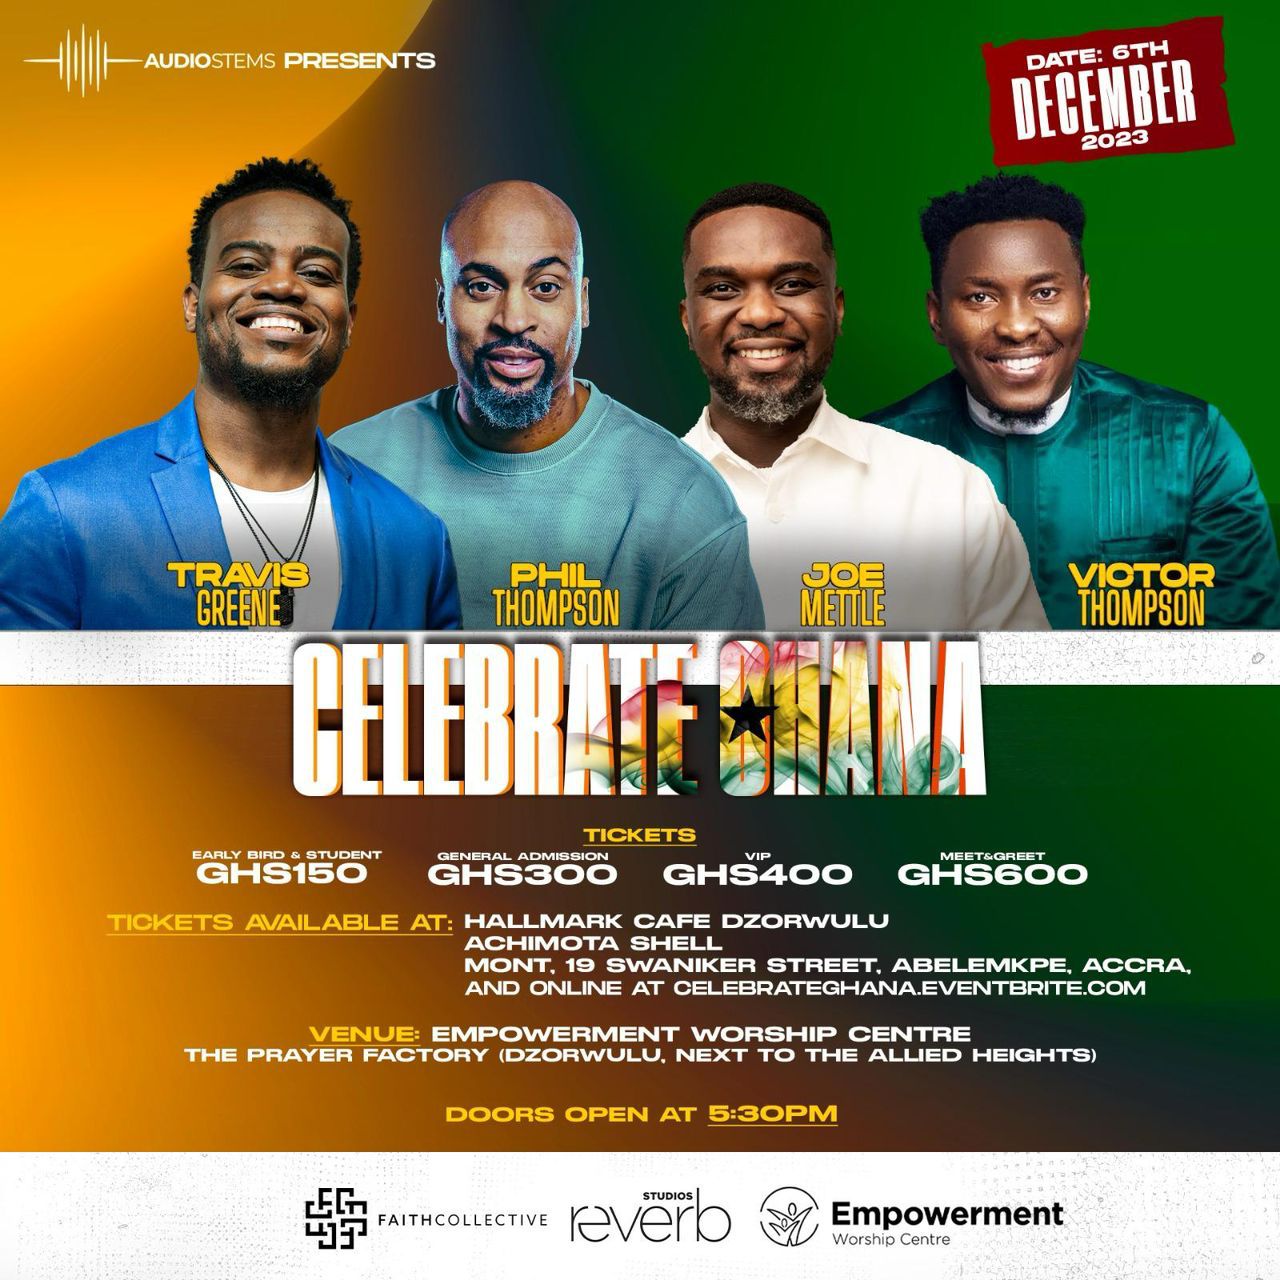 Travis Greene announces “Celebrate Ghana” gospel concert in Accra with Joe Mettle, Phil Thompson, and Victor Thompson